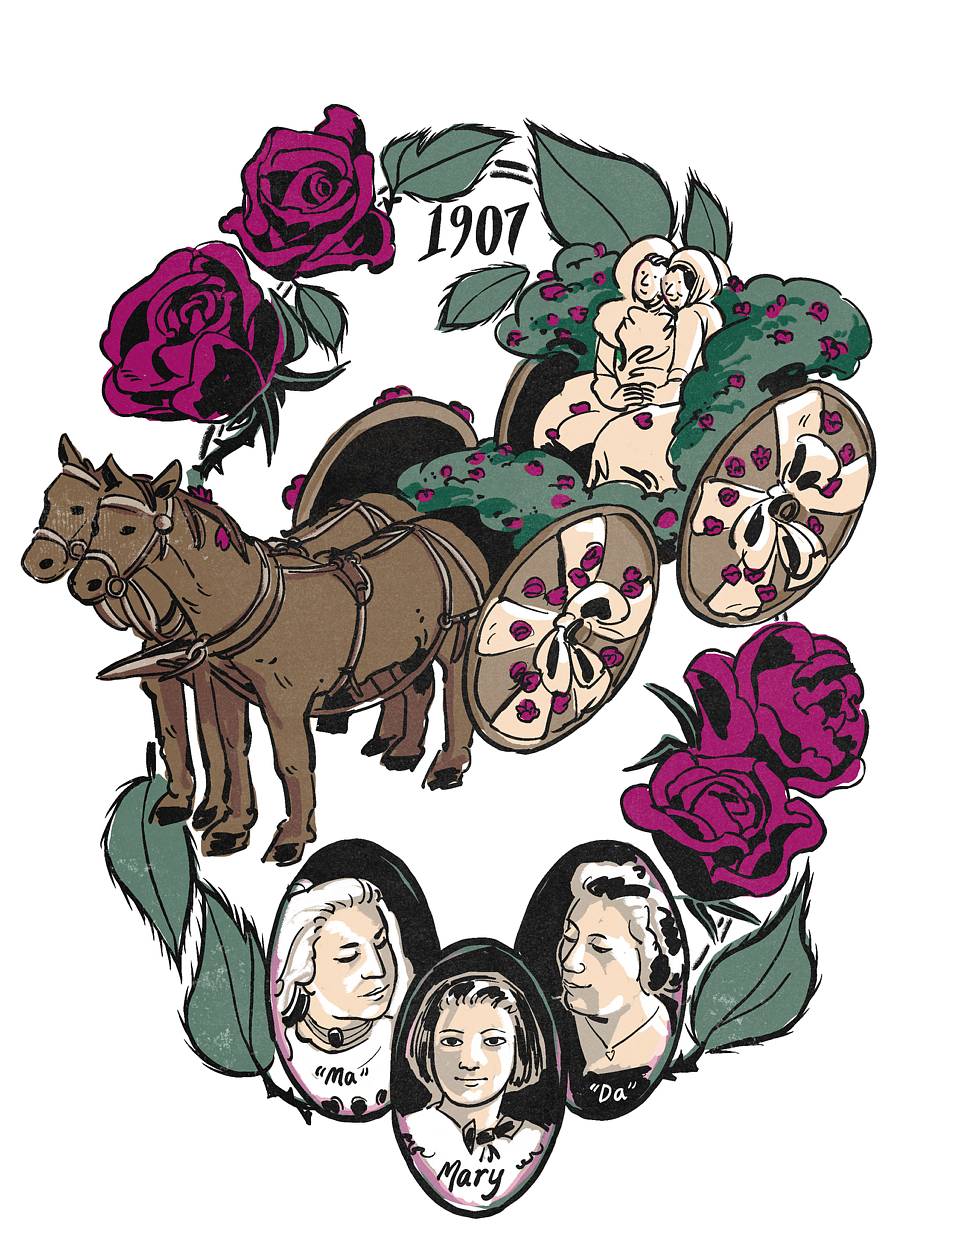 Illustration of Marie Equi and Harriet Speckart in Portland's Grand Floral Parade